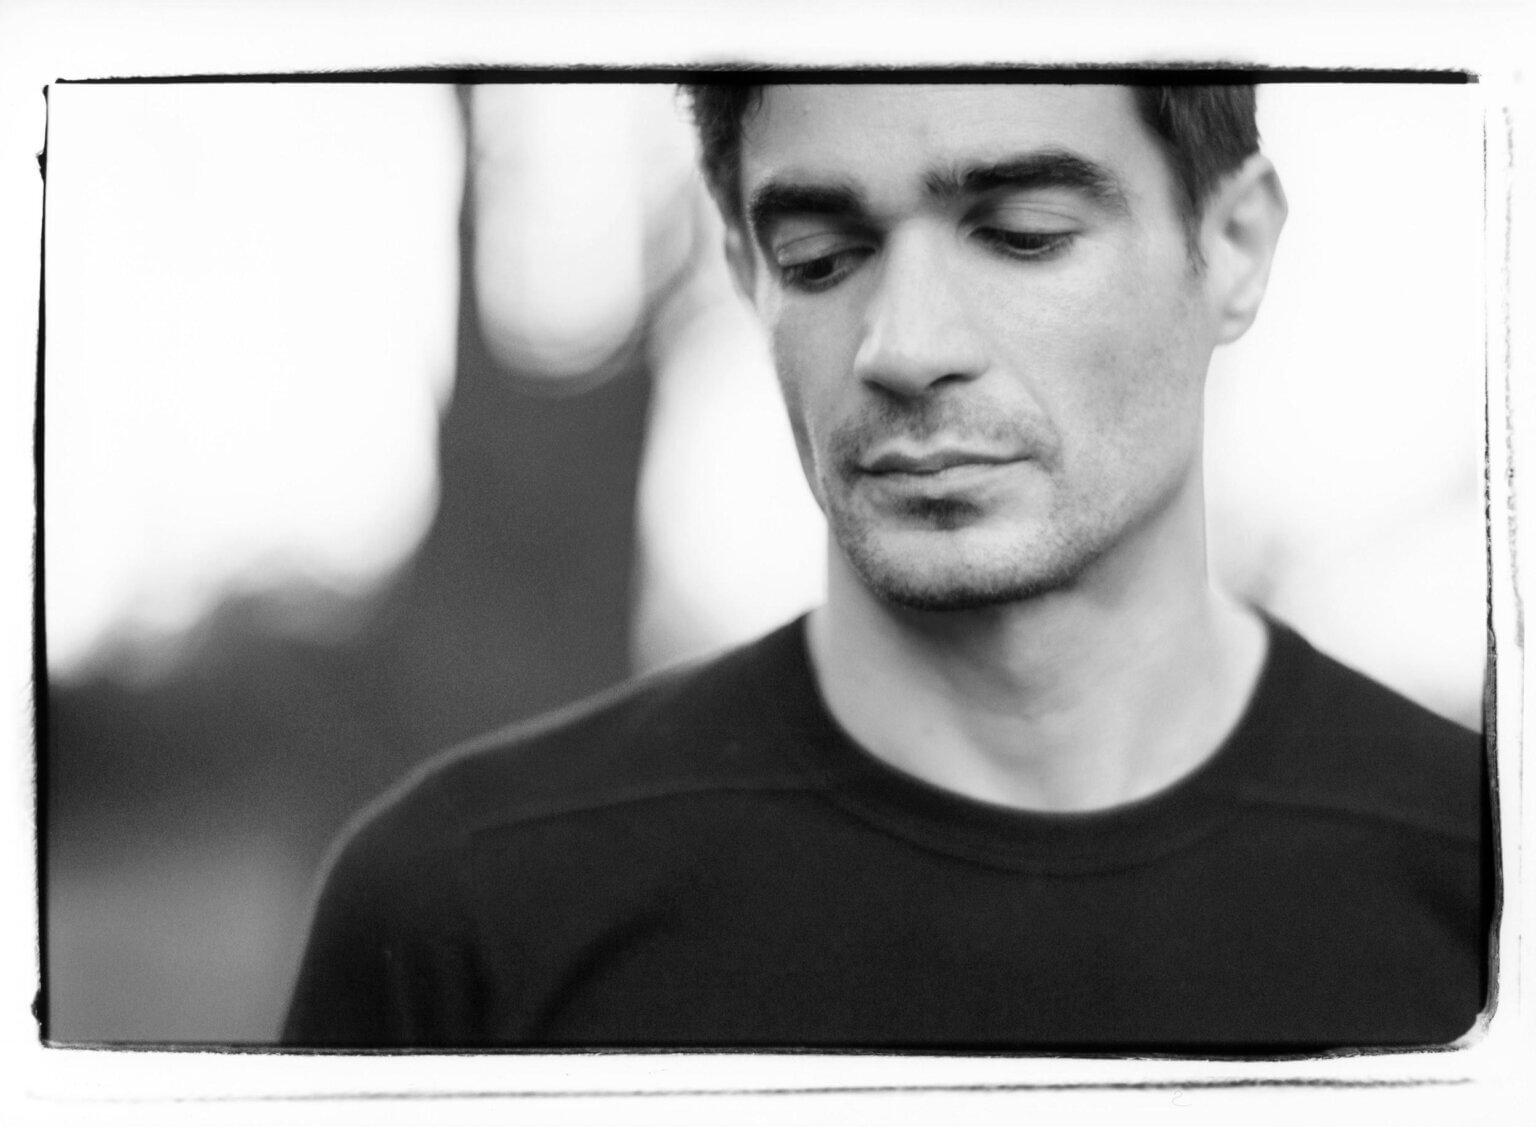 Jon Hopkins, has announced a new album, entitled Piano Versions, the EP will drop on April 16th digitally and July 2nd physically